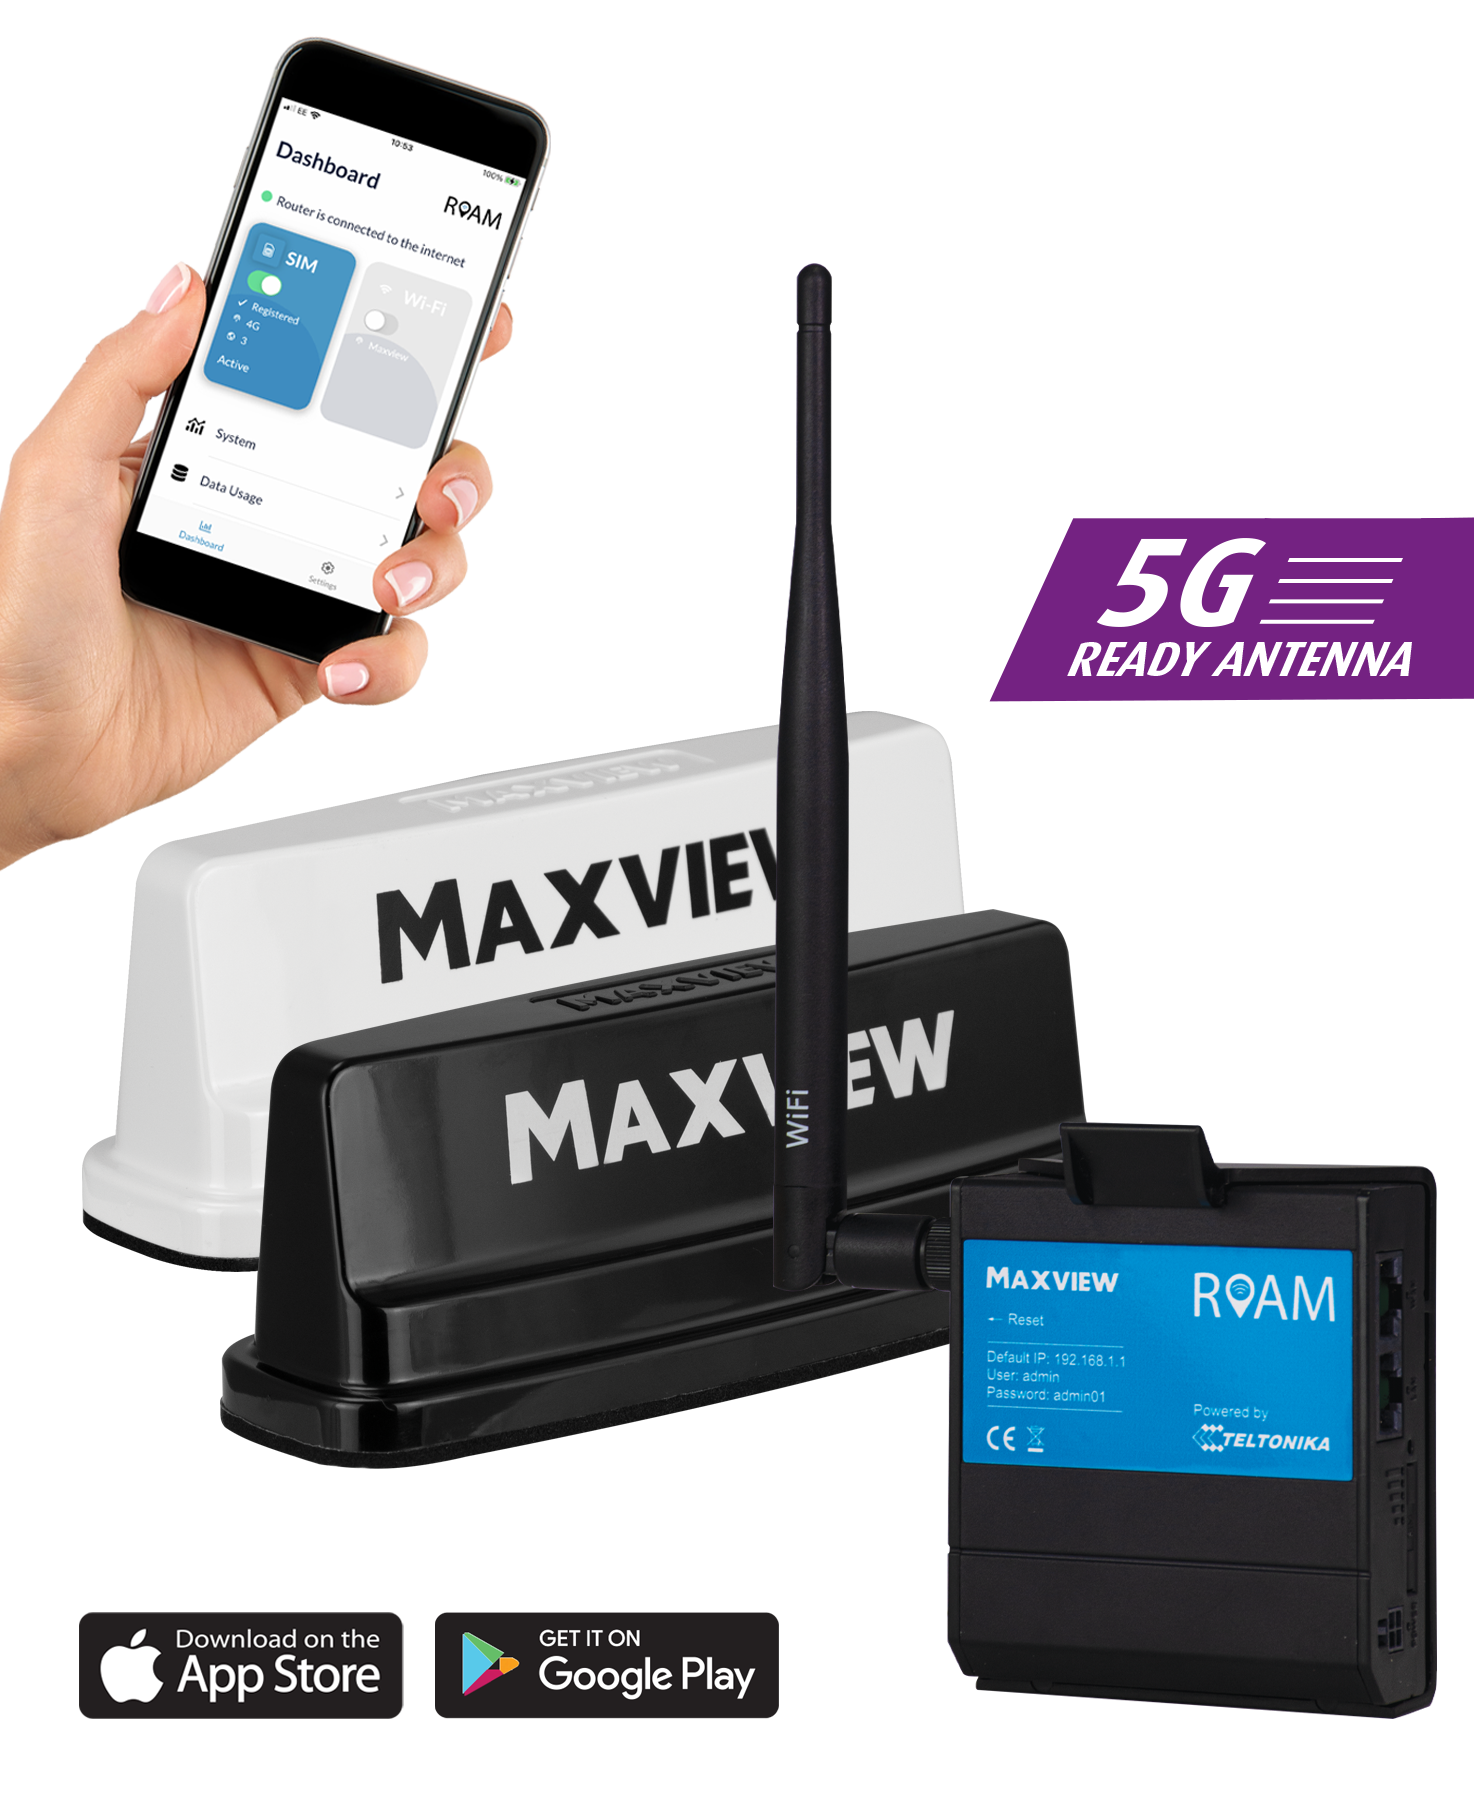 Maxview Roam Campervan Mobile WIFI System